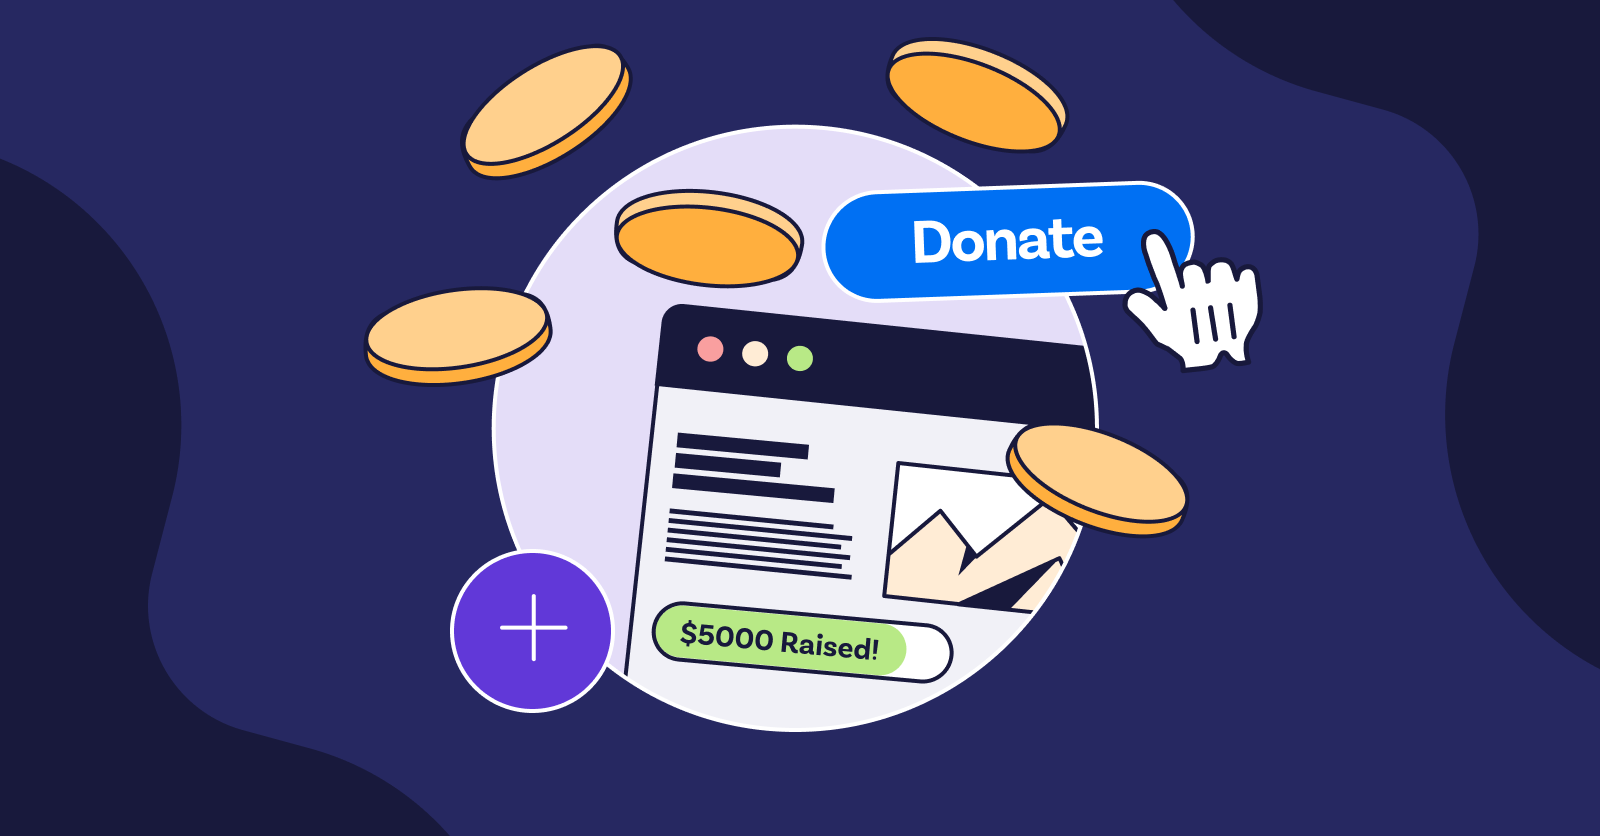 Illustration of a donation page.